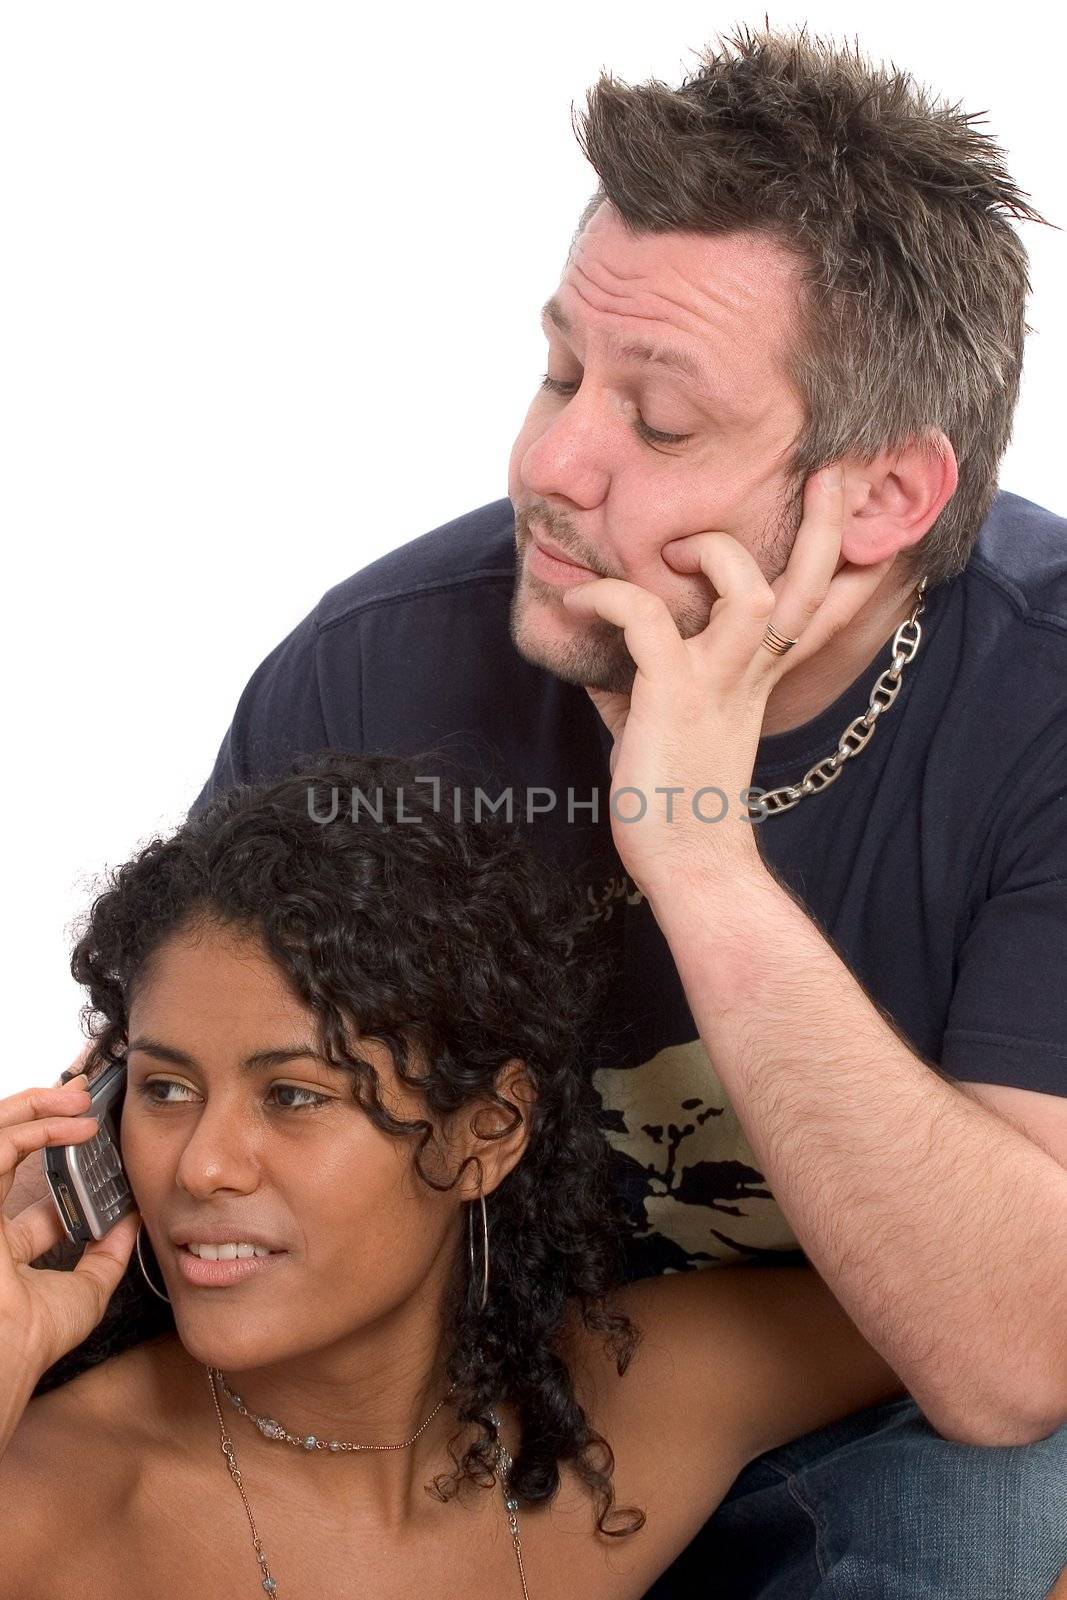 Man looking very bored while his girlfiend keeps talking on the phone